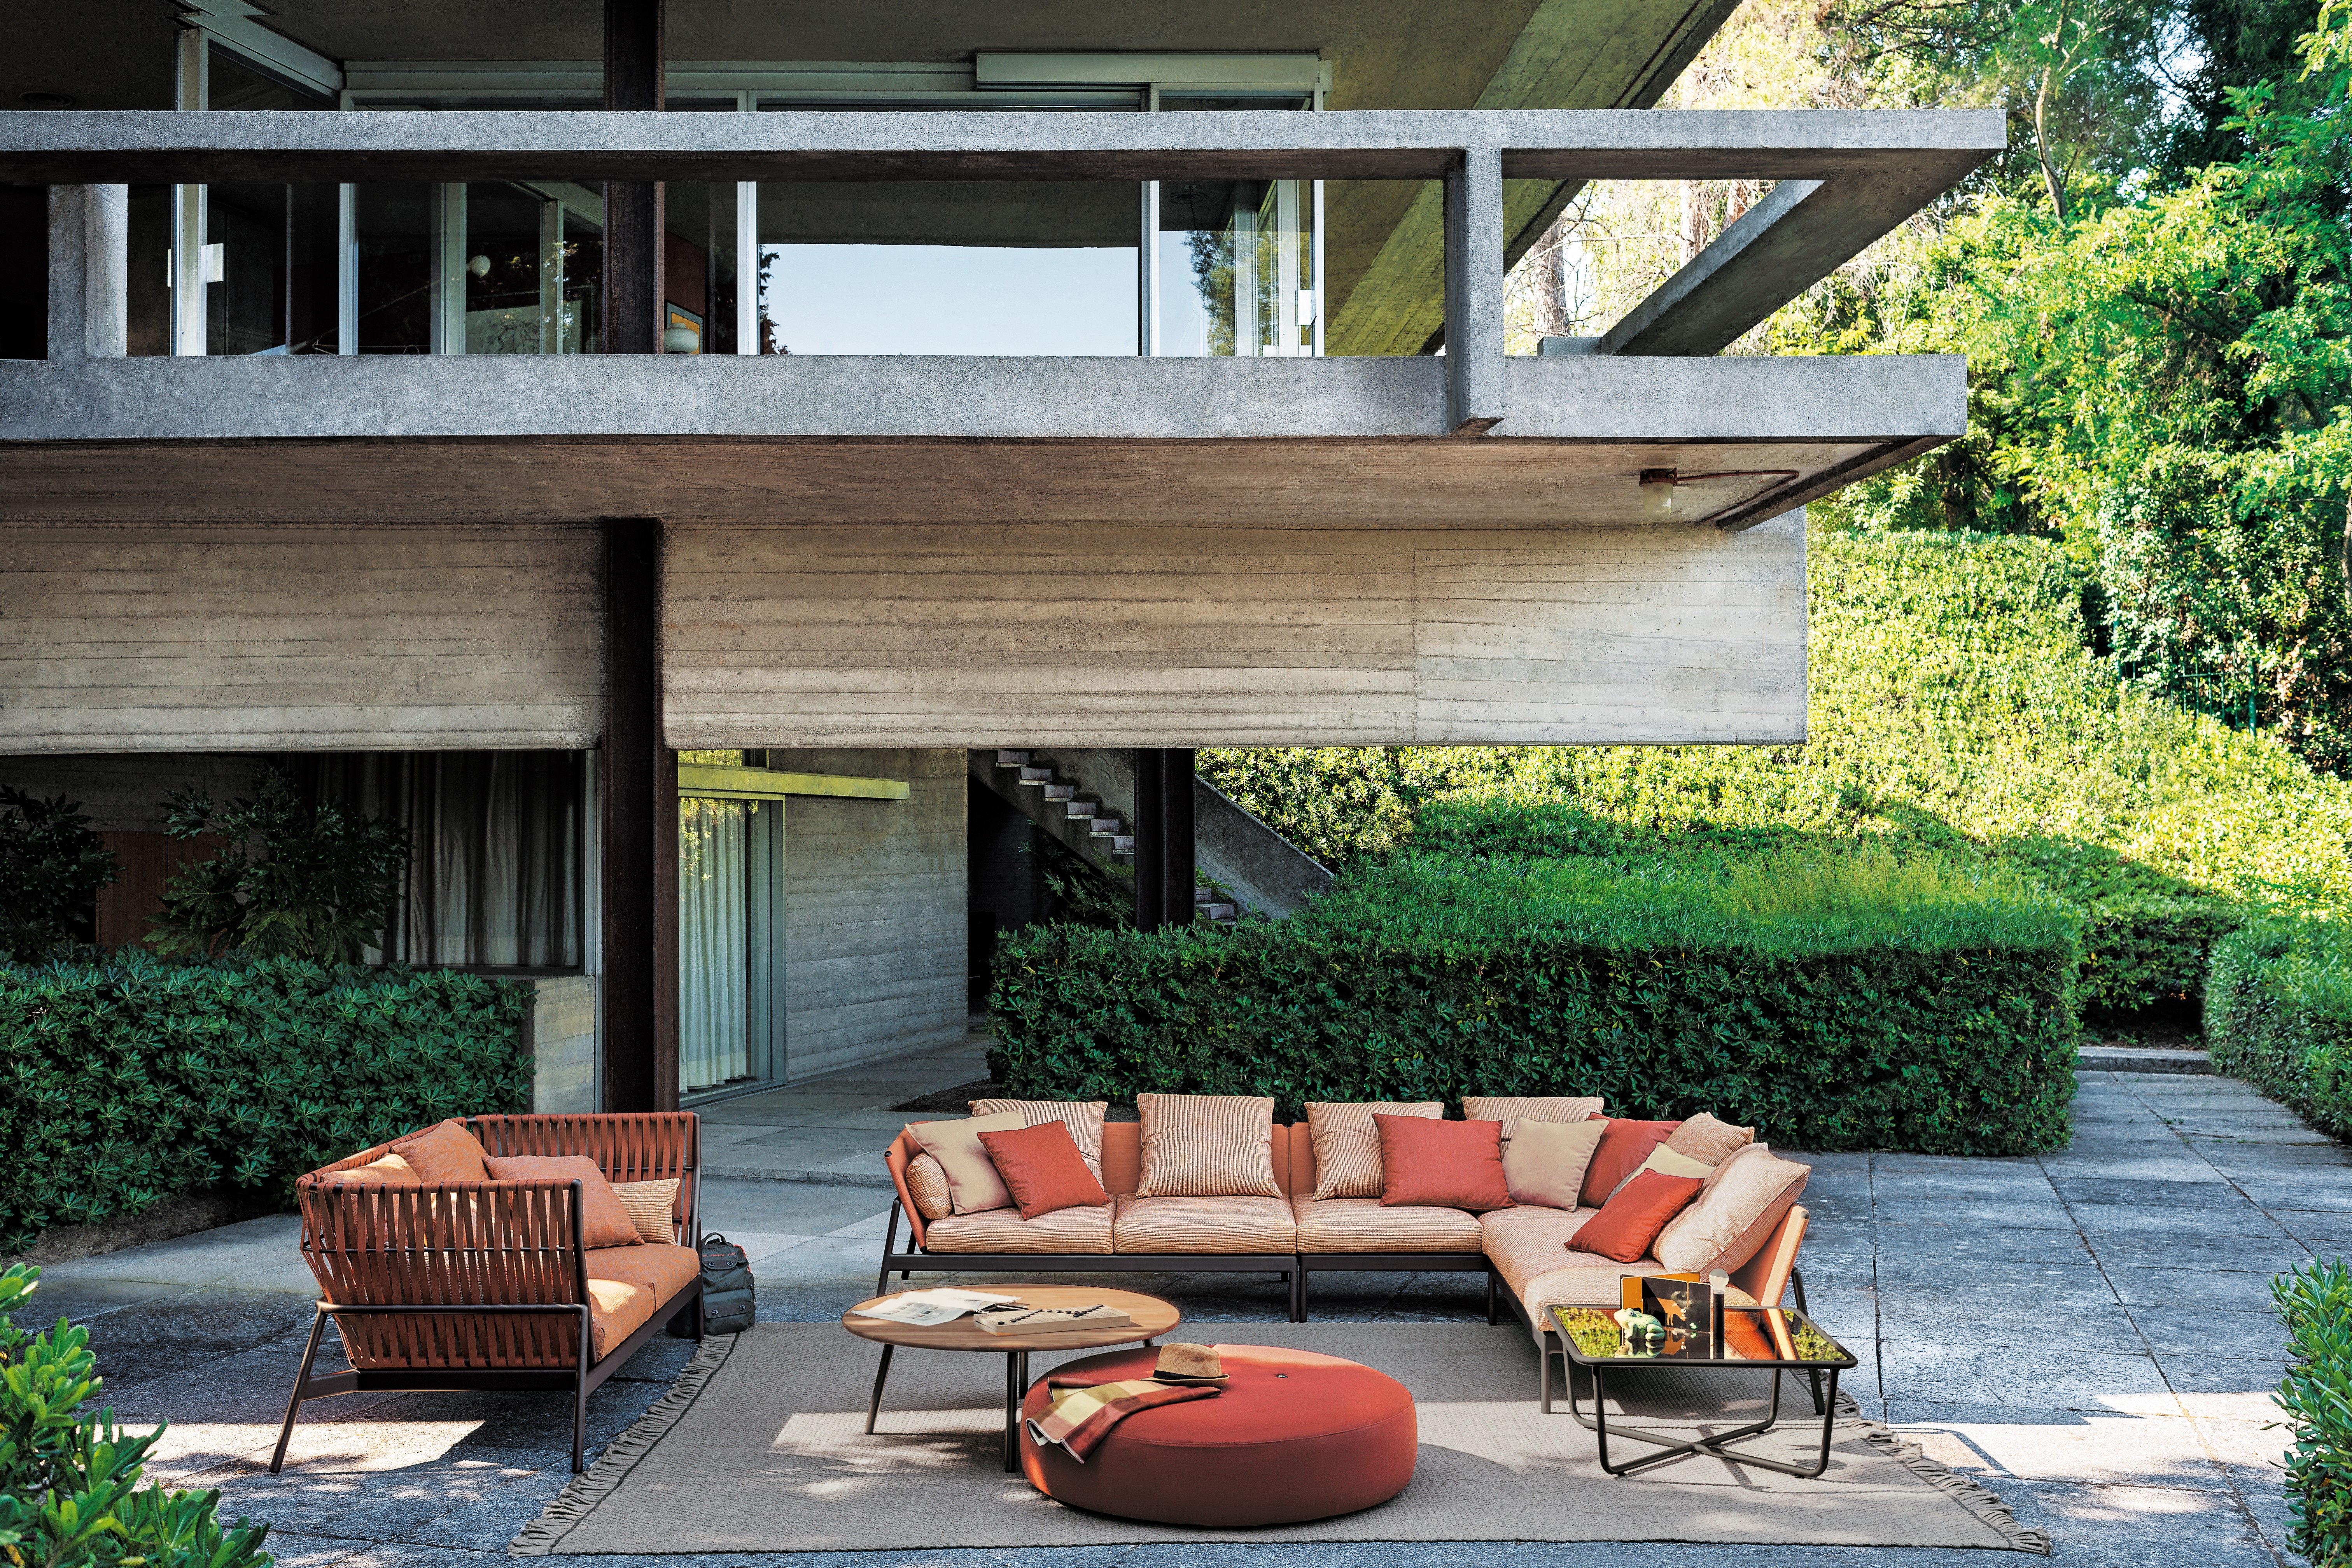 Zzue Creation’s Piper Sofa by Roda comes in a unique rust-coloured finish that enlivens outdoor space.